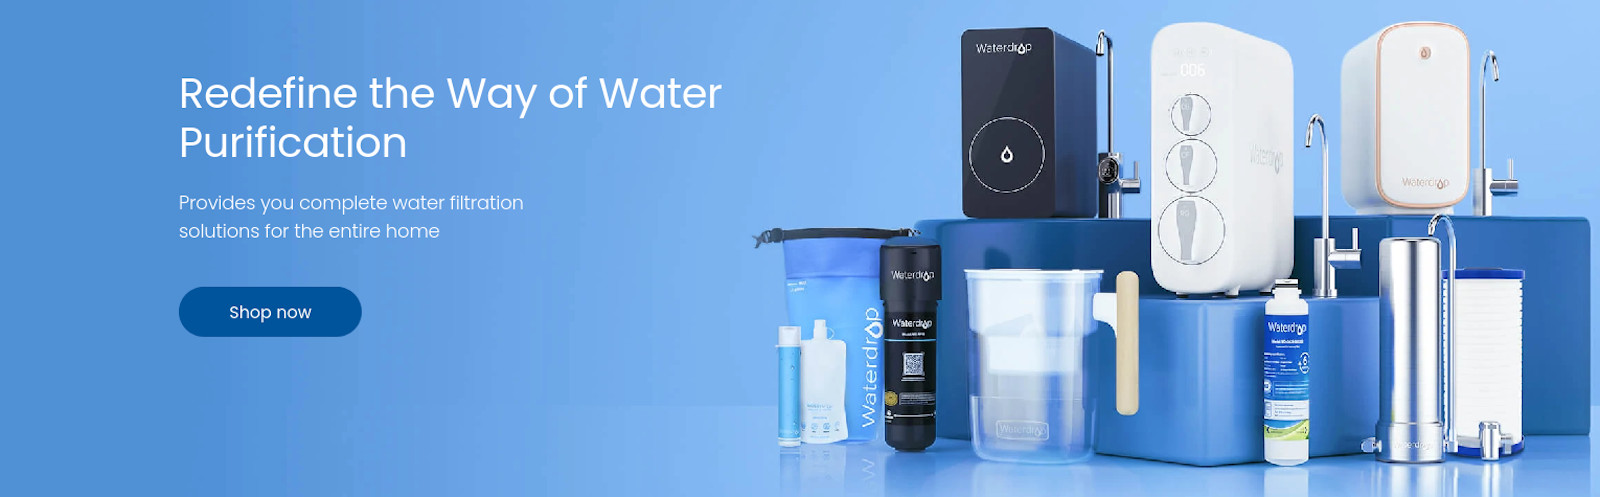 water purification products at a bargain price